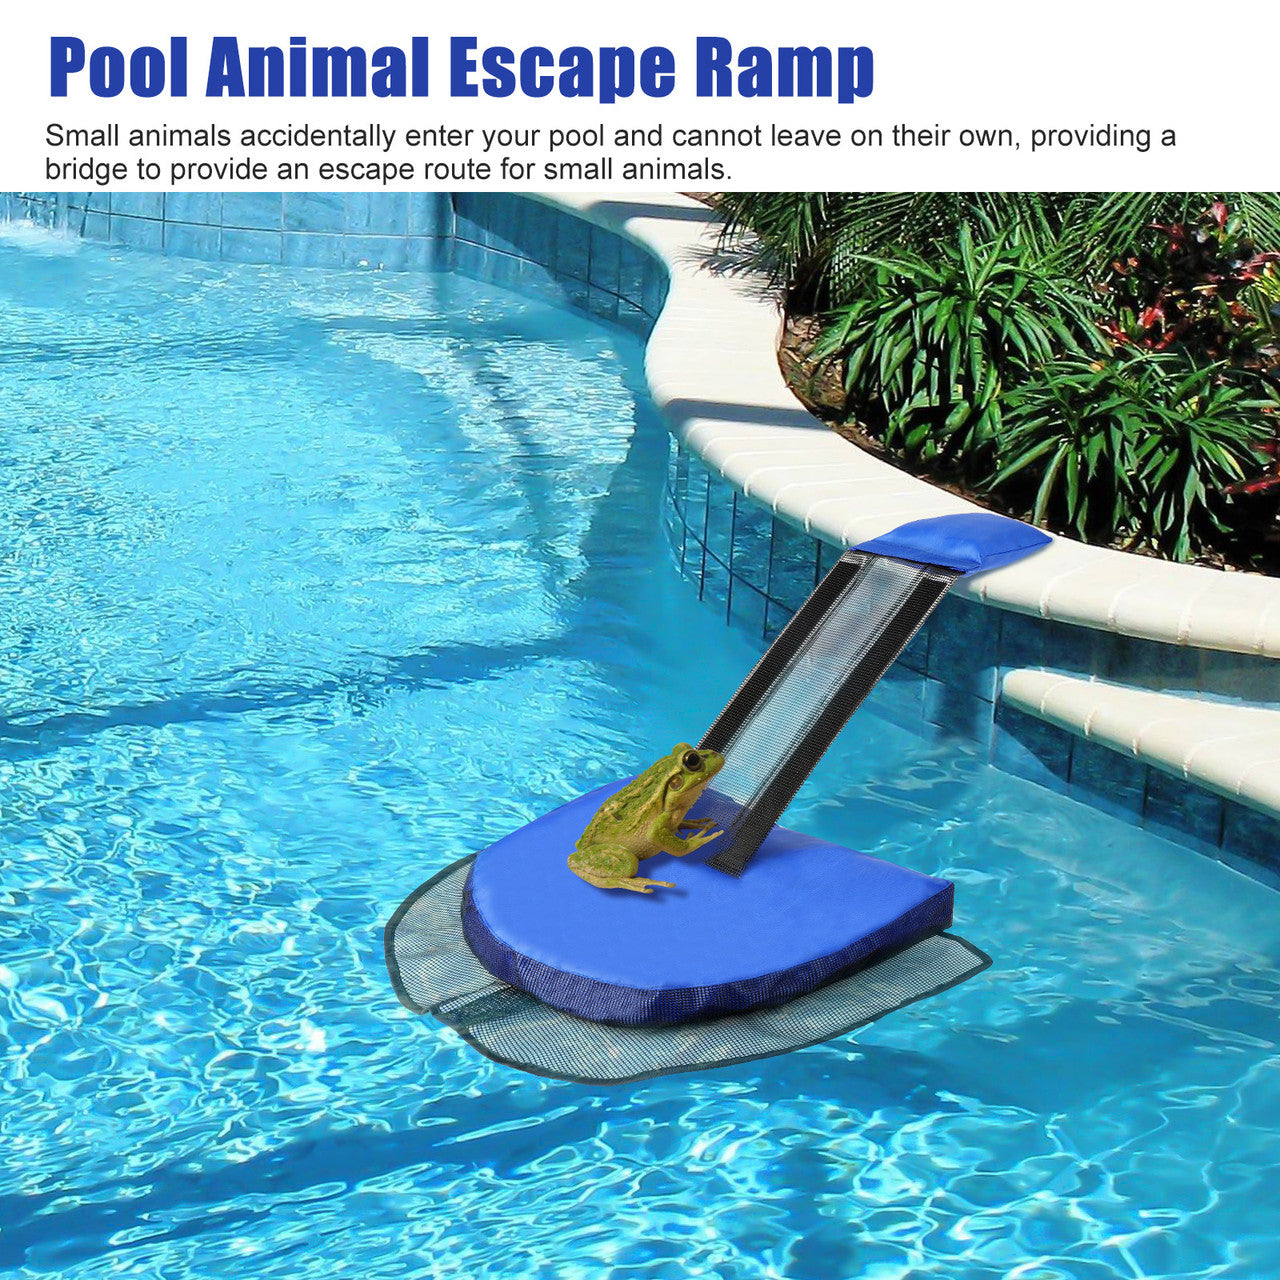 Outdoor Pool Animal Escape Net for Small Animals, Easy to Setup and Disassemble